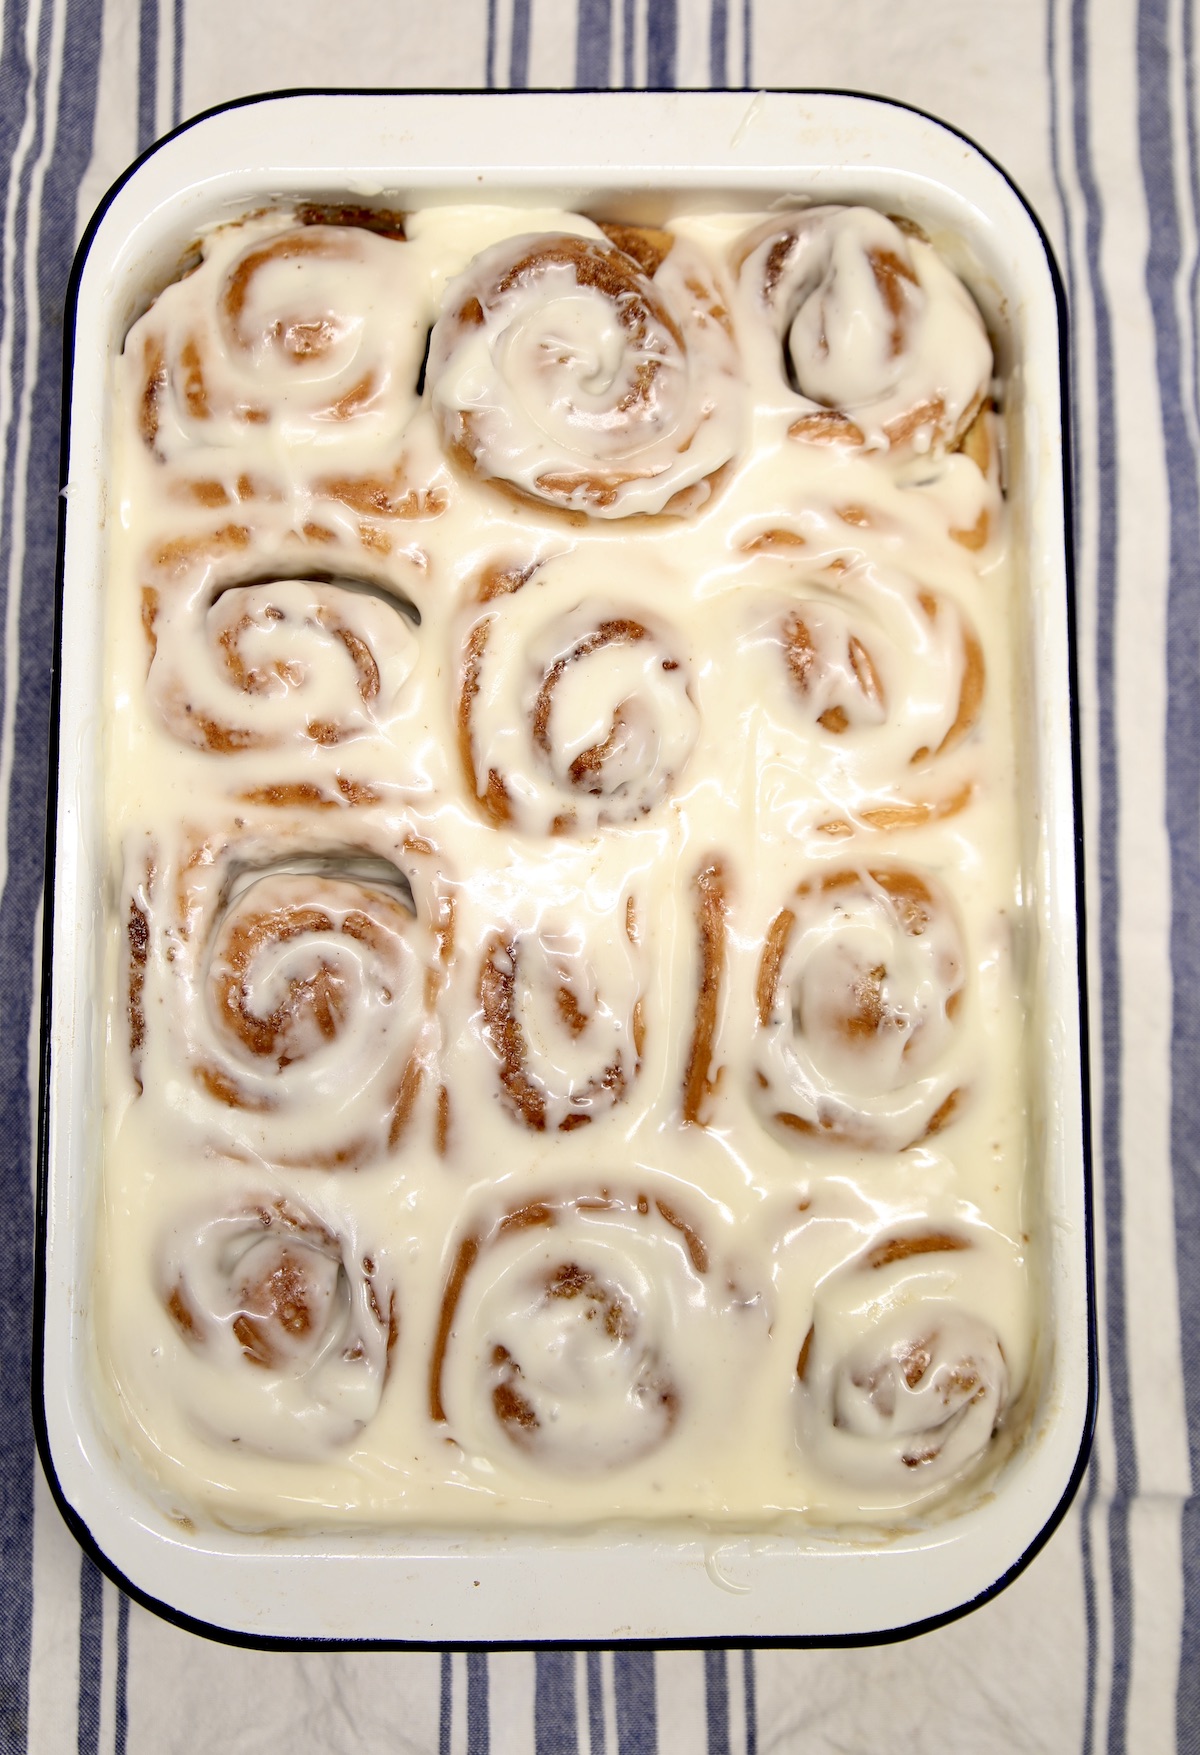 Pan of cinnamon rolls with cream cheese icing.